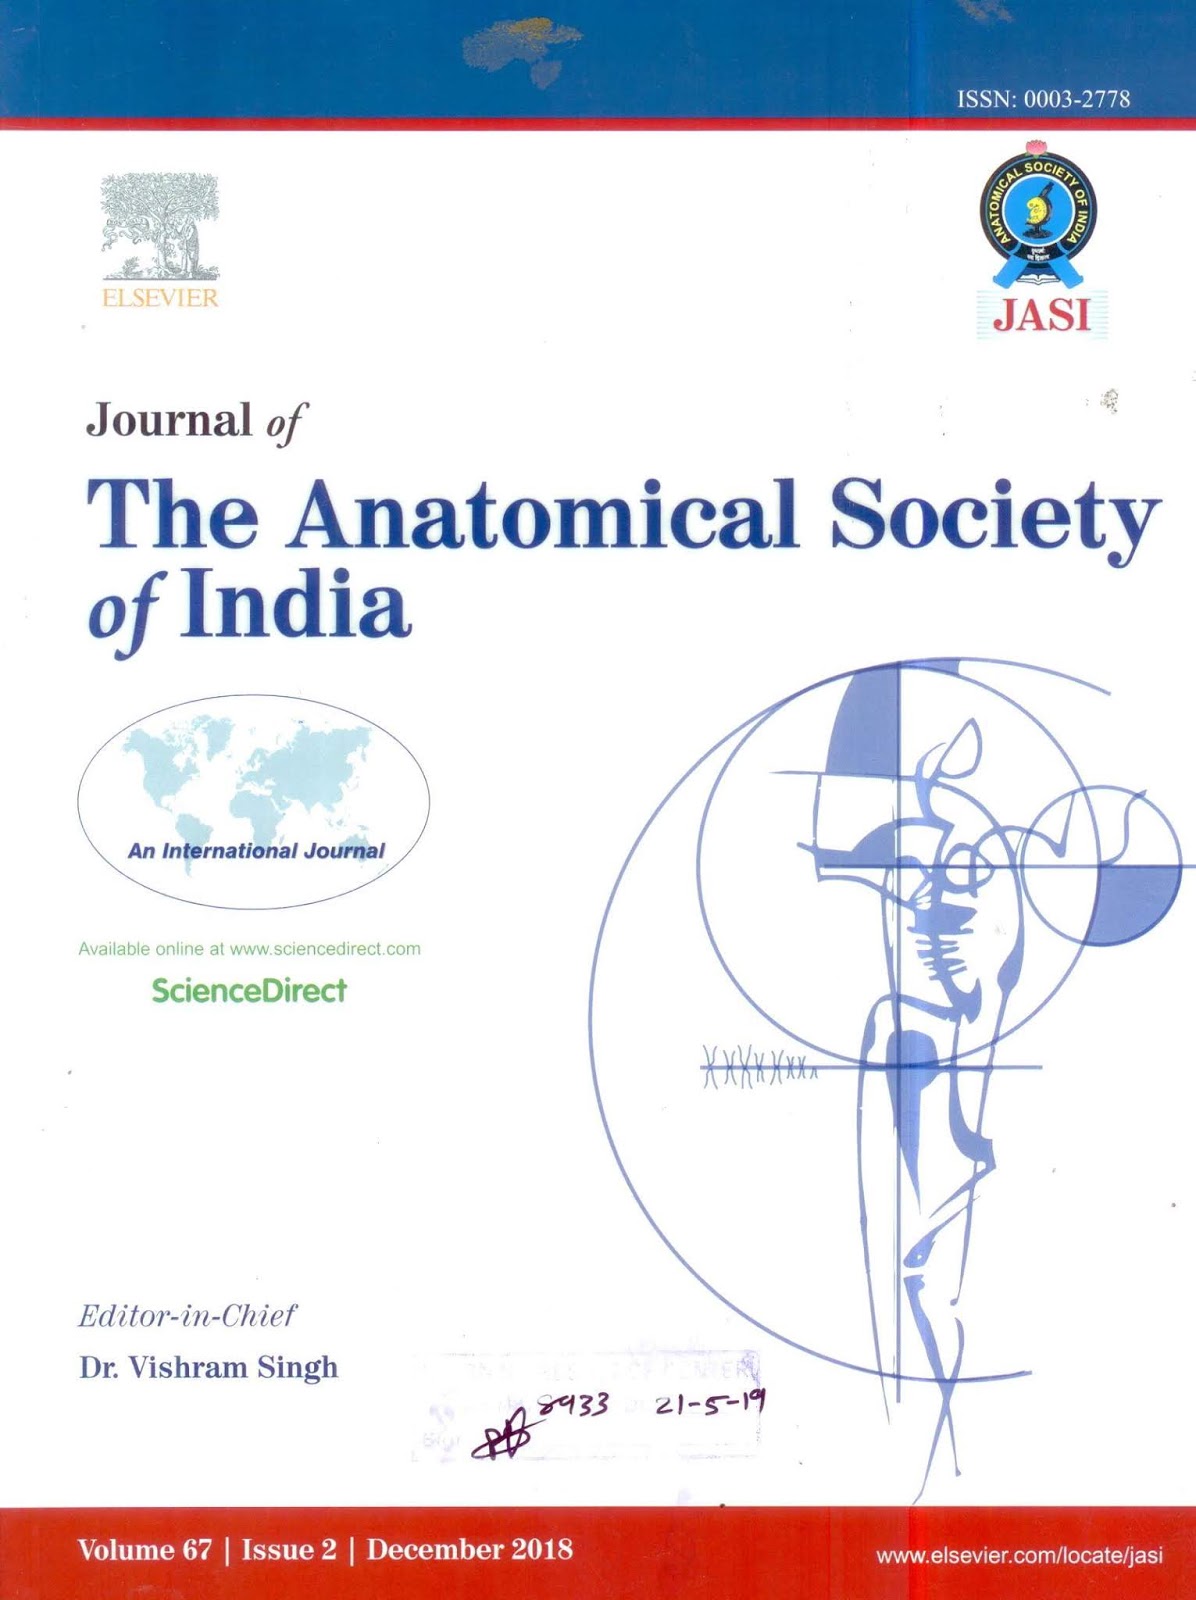 https://www.sciencedirect.com/journal/journal-of-the-anatomical-society-of-india/vol/67/issue/2